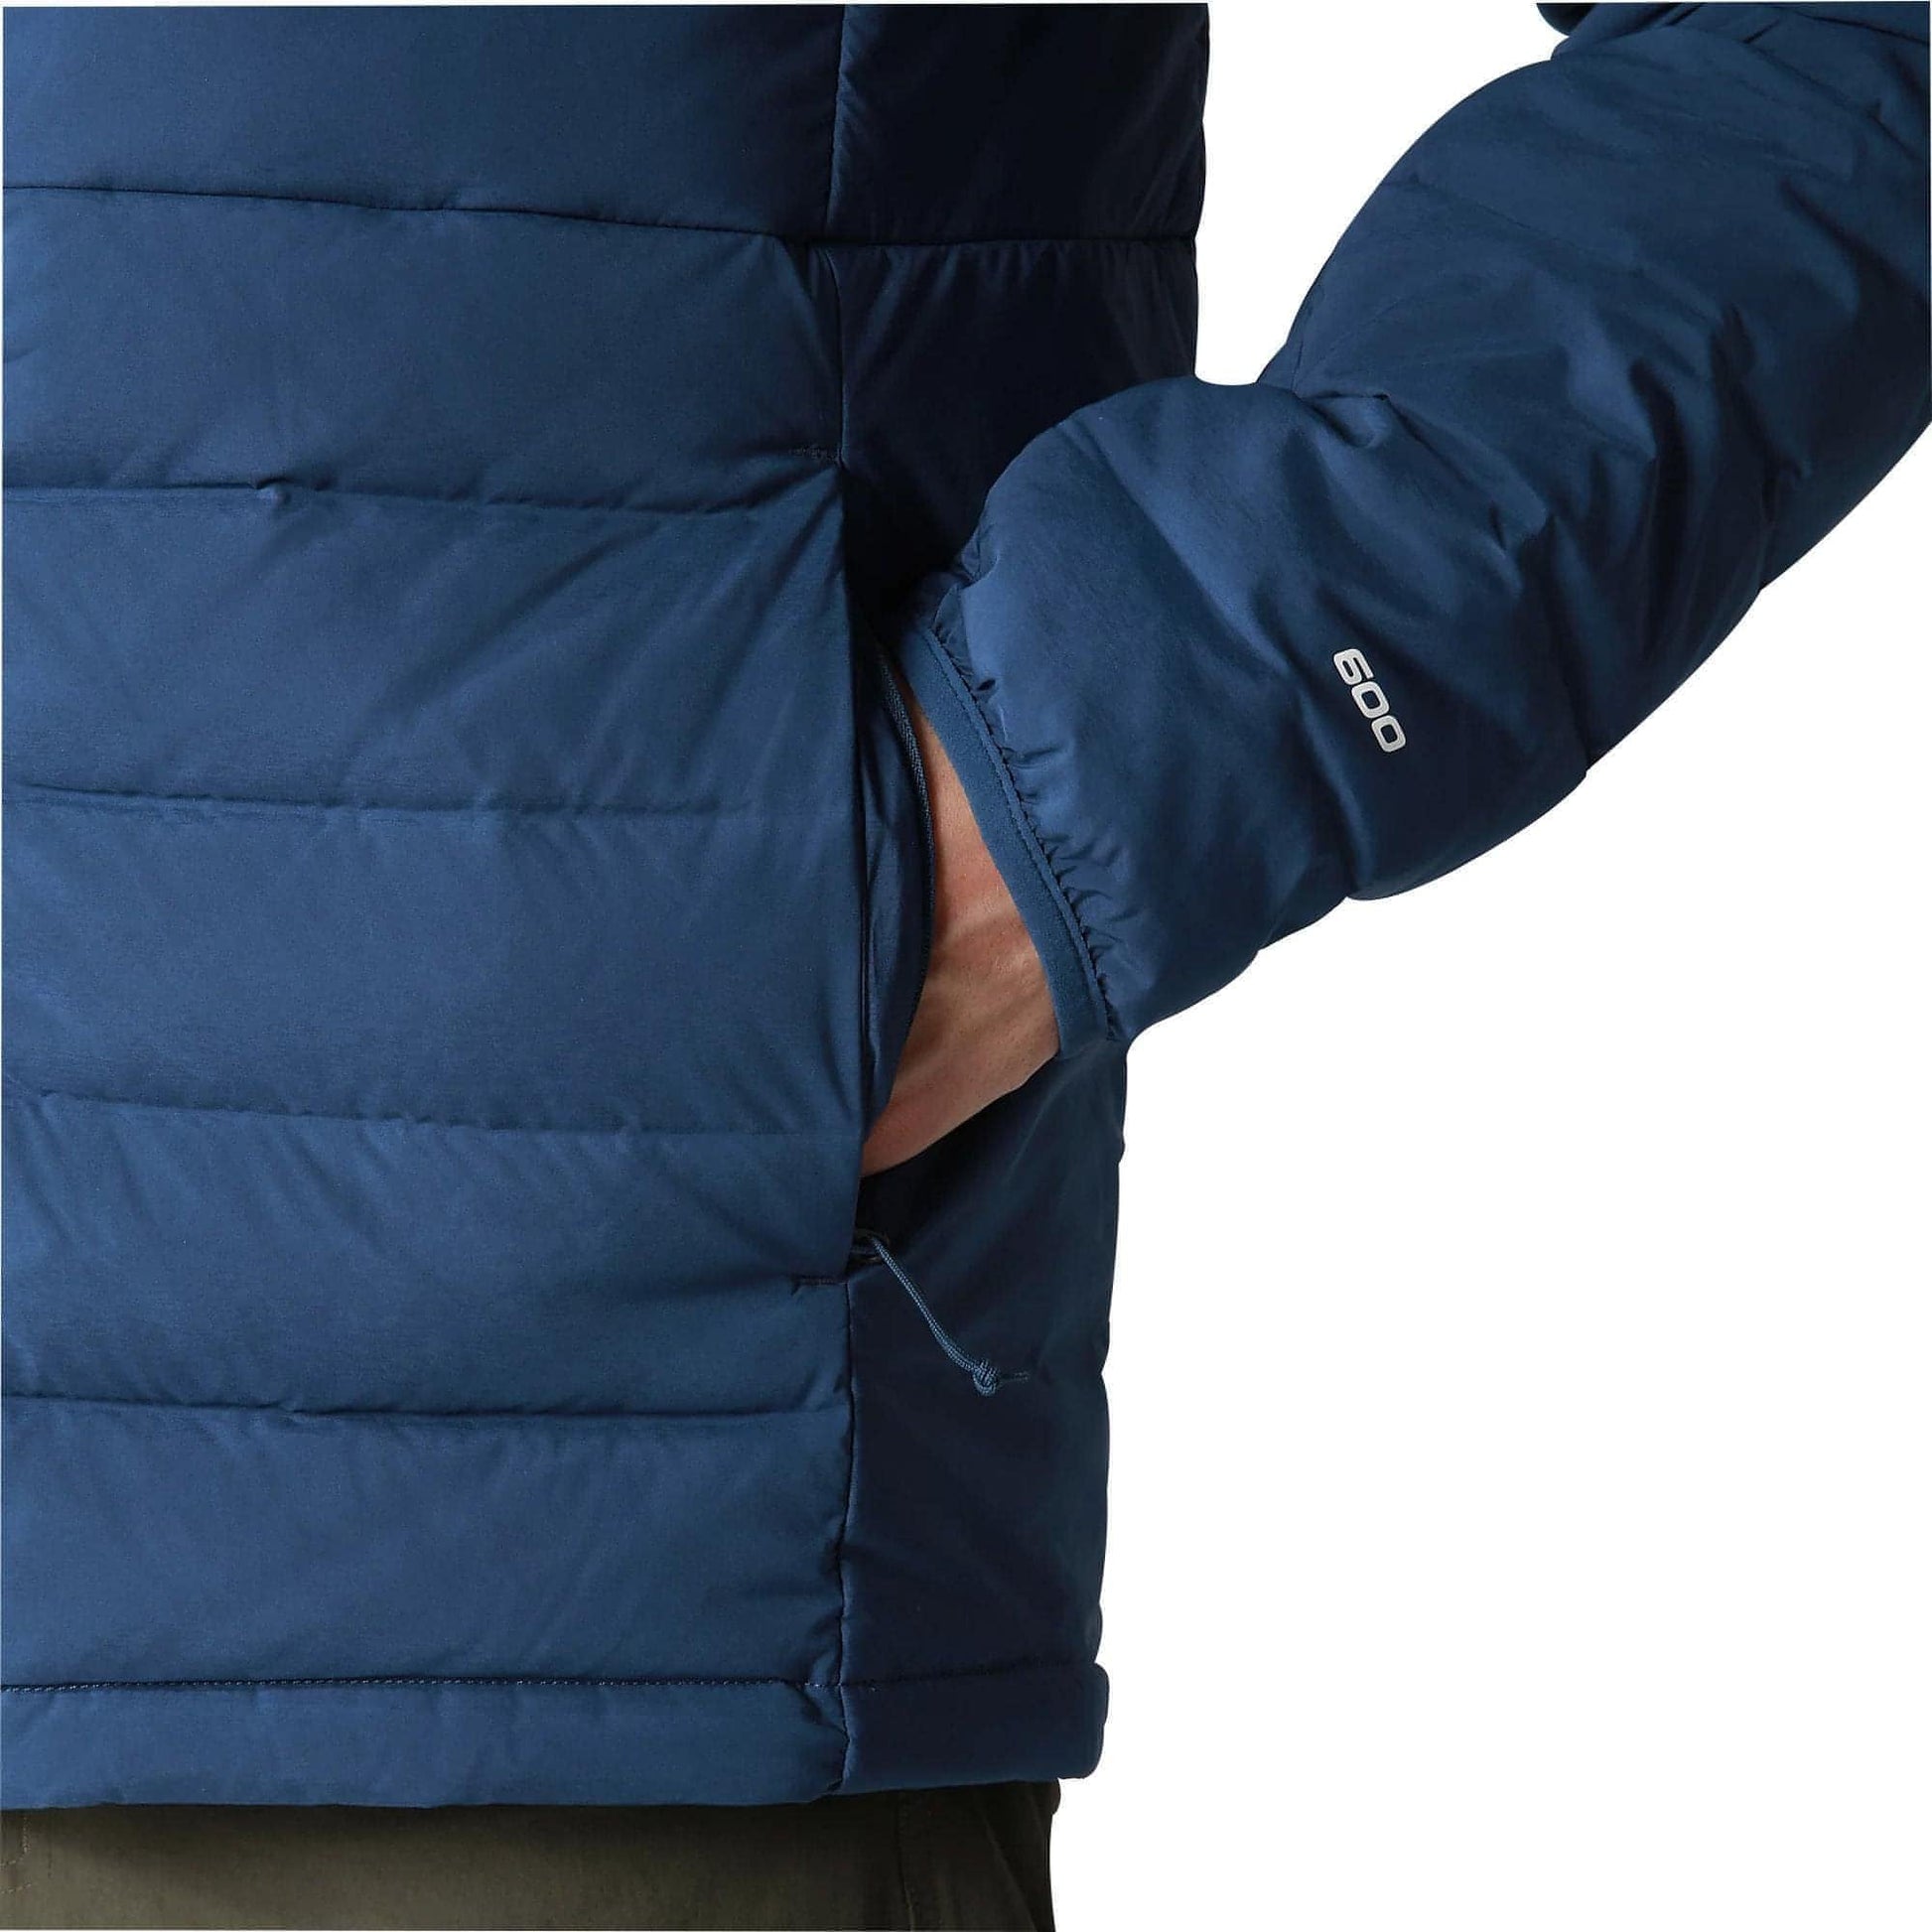 The North Face Belleview Stretch Down Jacket Nf0A7Ujehdc1 Details